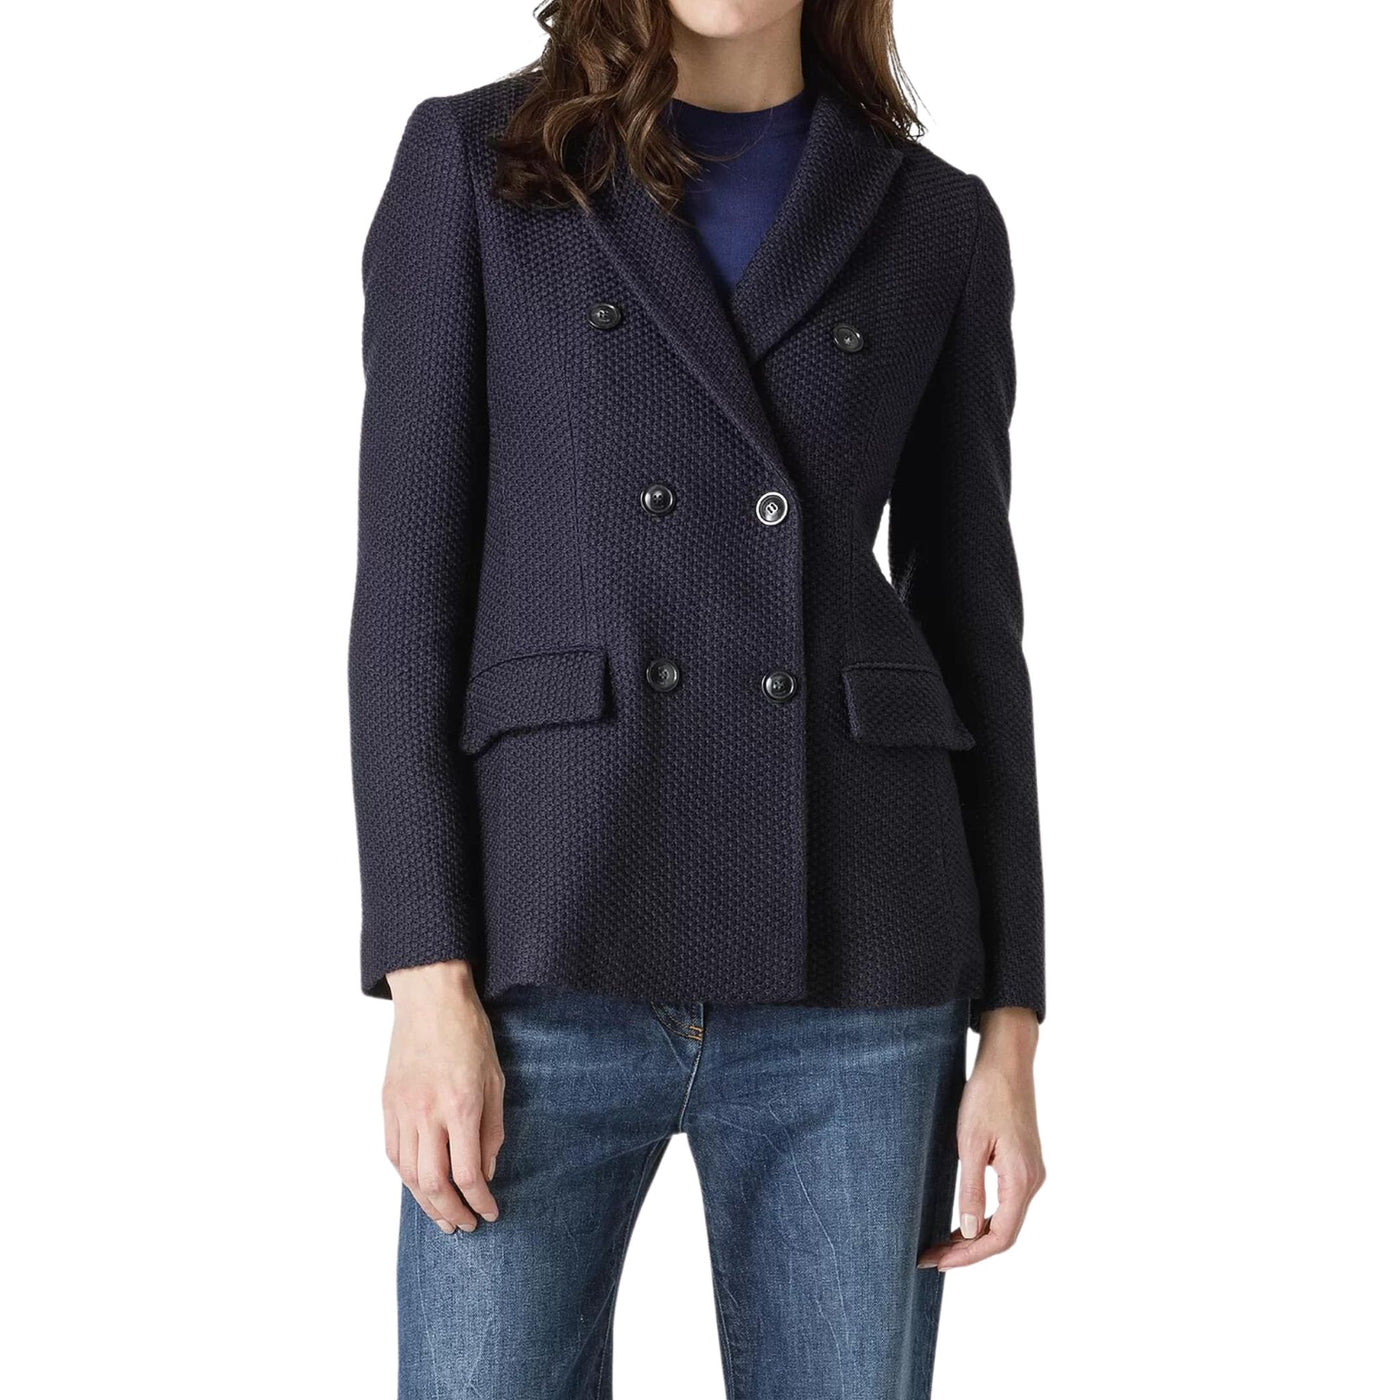 Double-breasted women's jacket with buttons